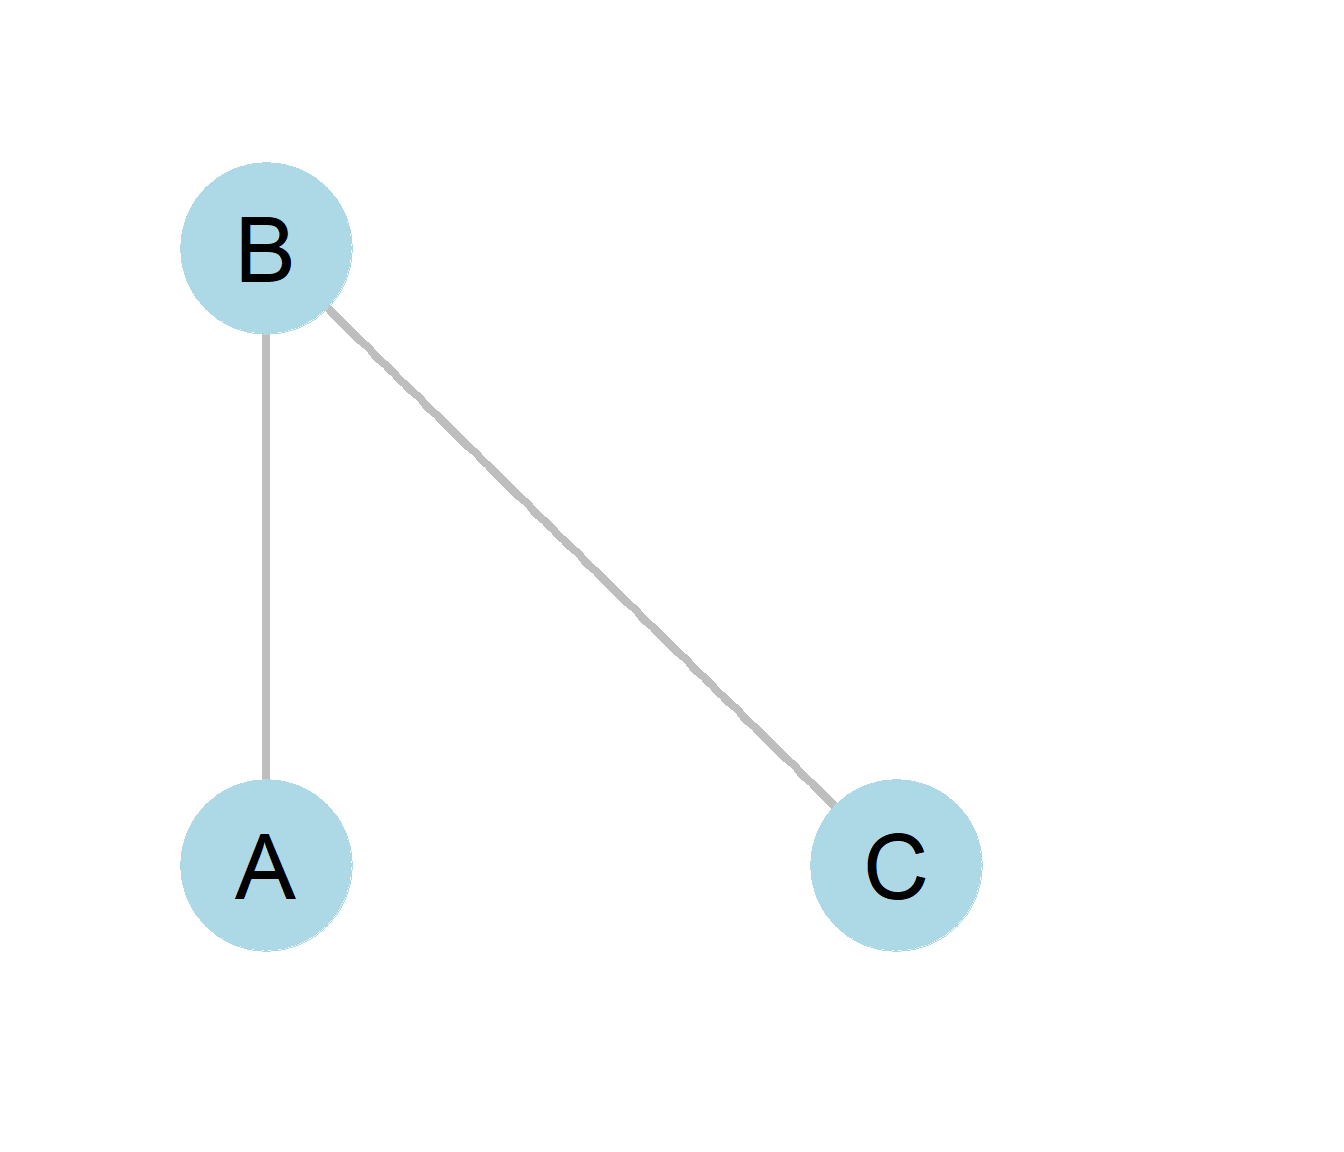 A simple network.